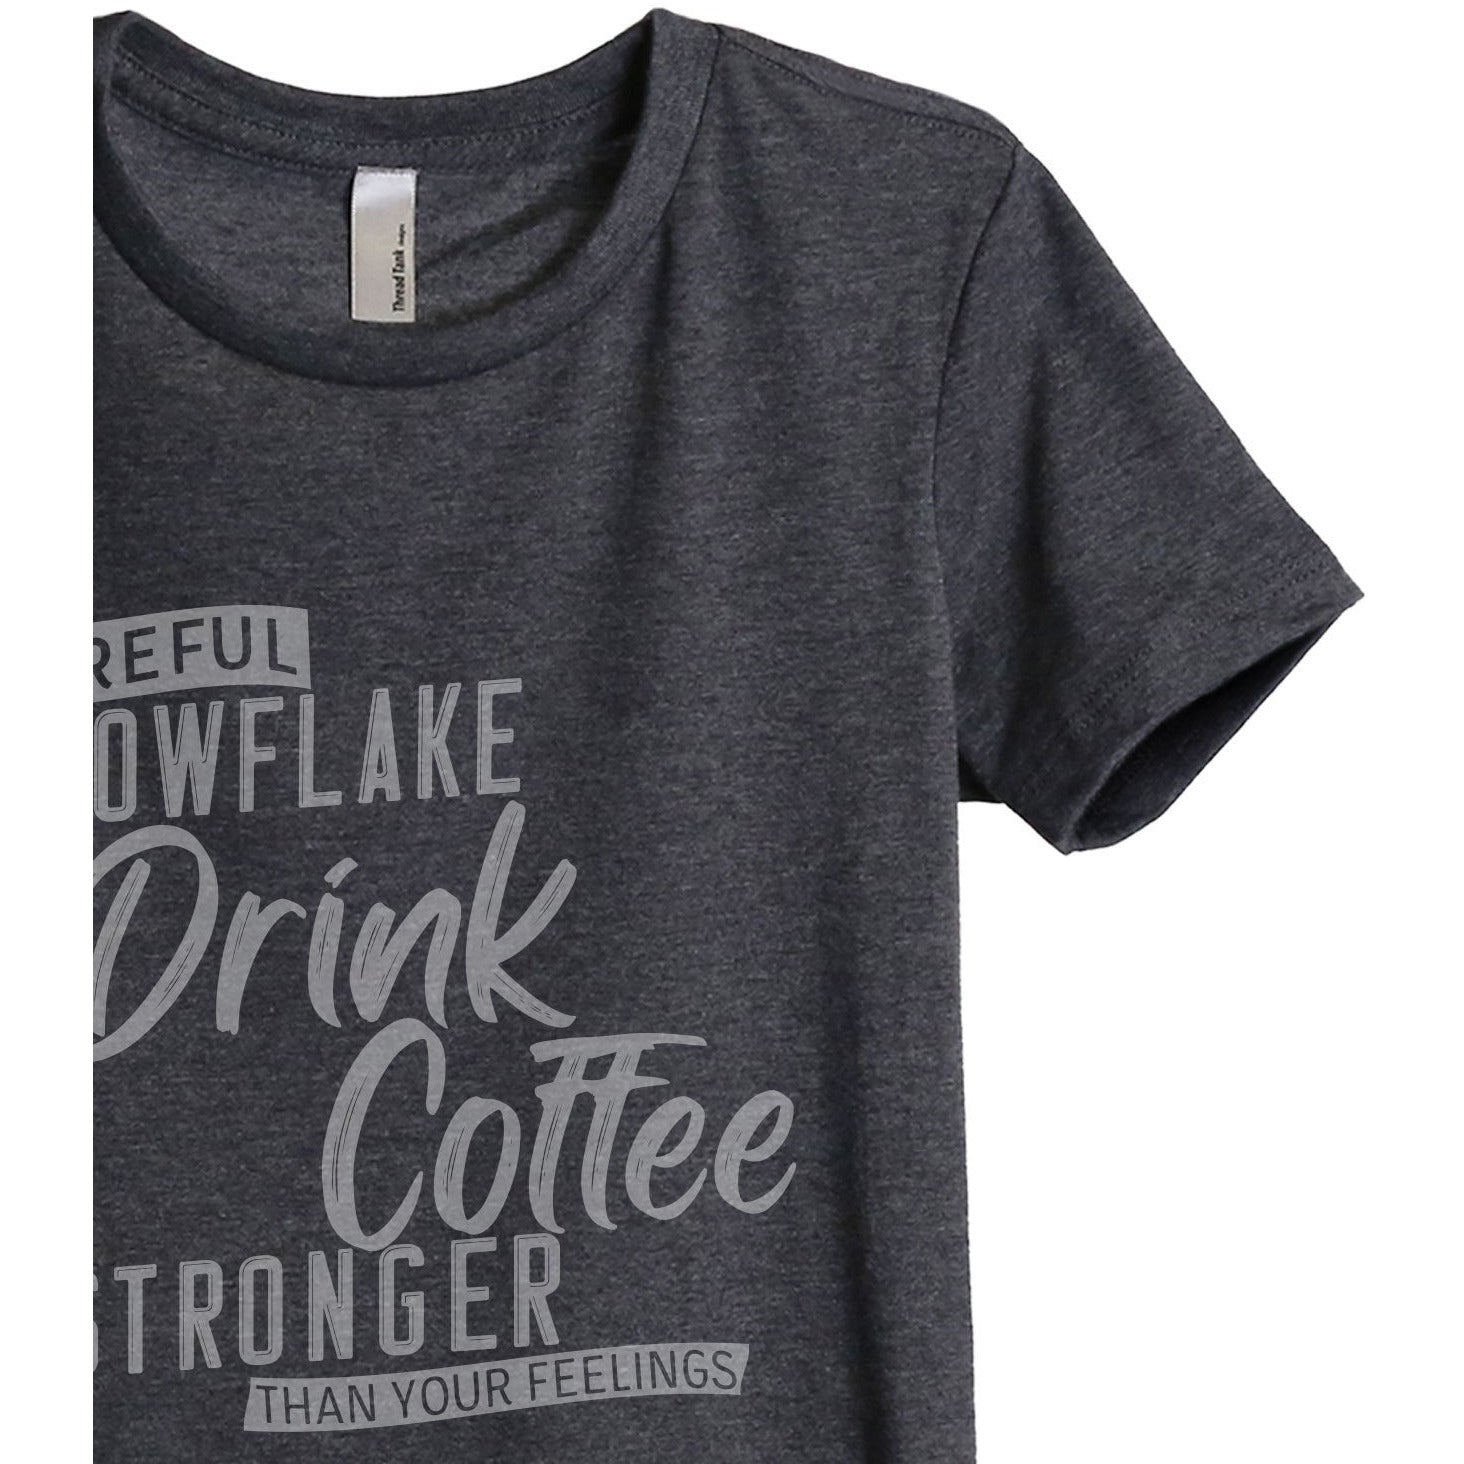 Careful Snowflake...I Drink Coffee Stronger Than Your Feelings Women's Relaxed Crewneck T-Shirt Top Tee Charcoal Grey
